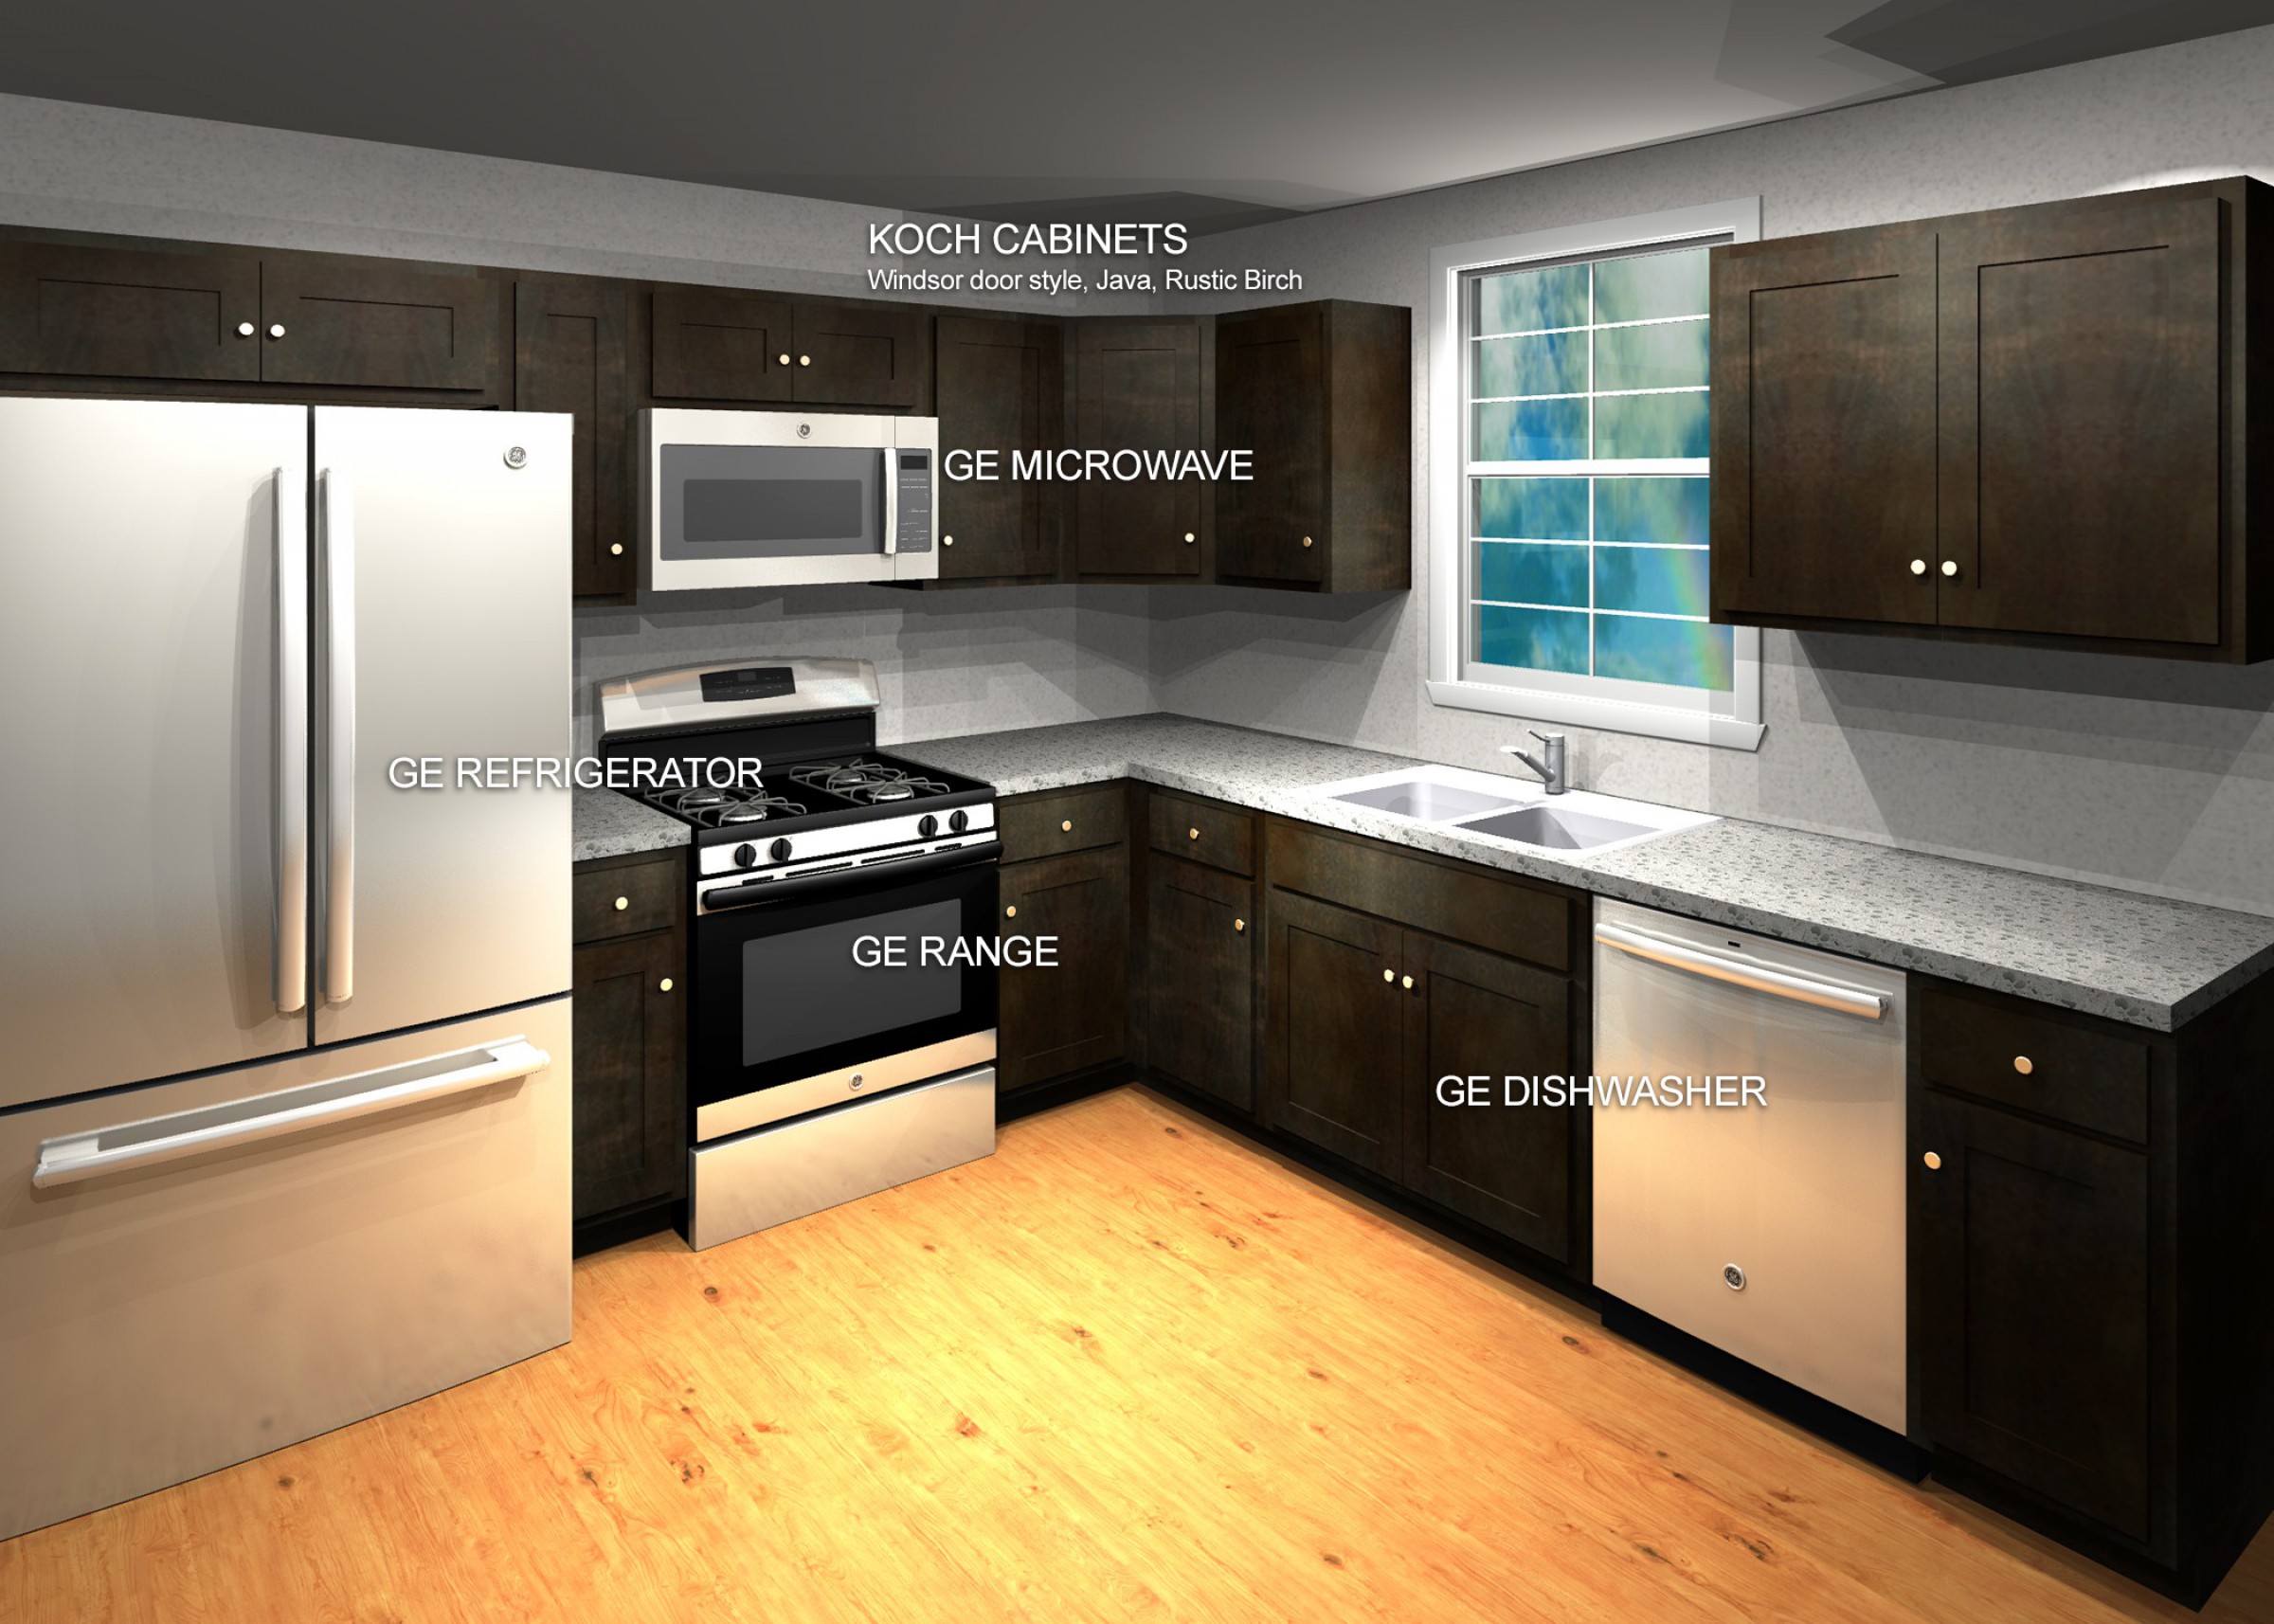 Koch Express Cabinets with GE Appliance Package